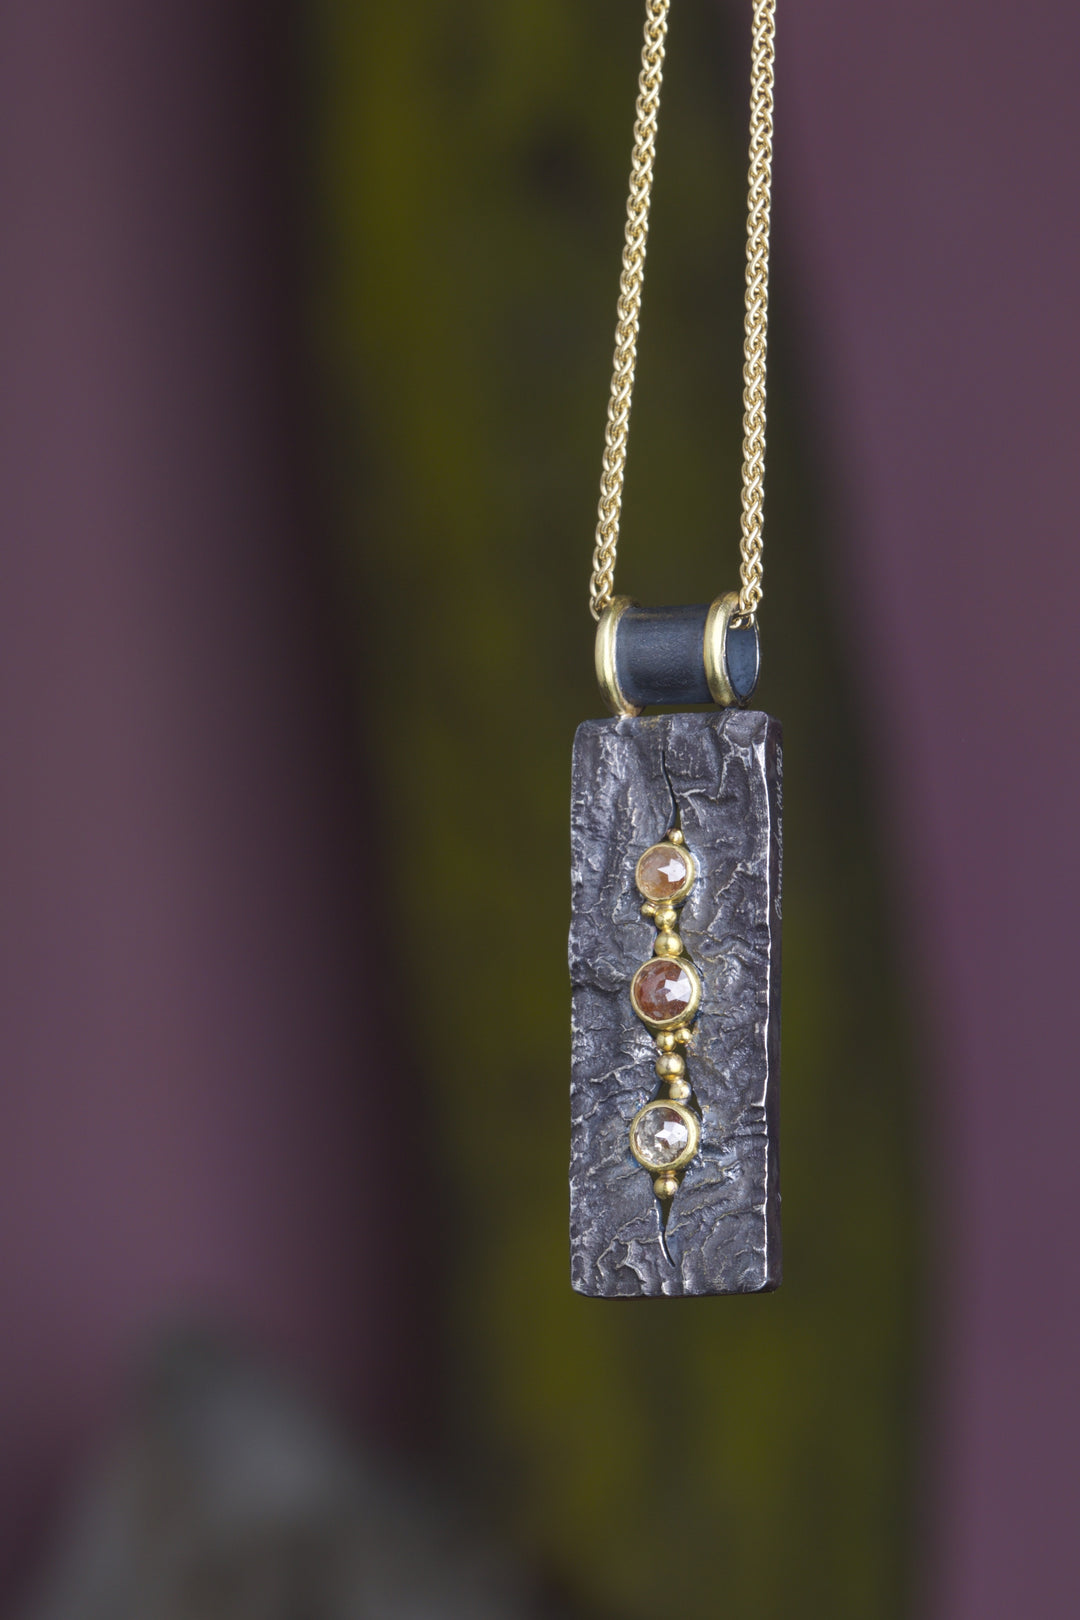 Rough Cut Diamonds and Mixed Metal Pendant 06748 - Ormachea Jewelry